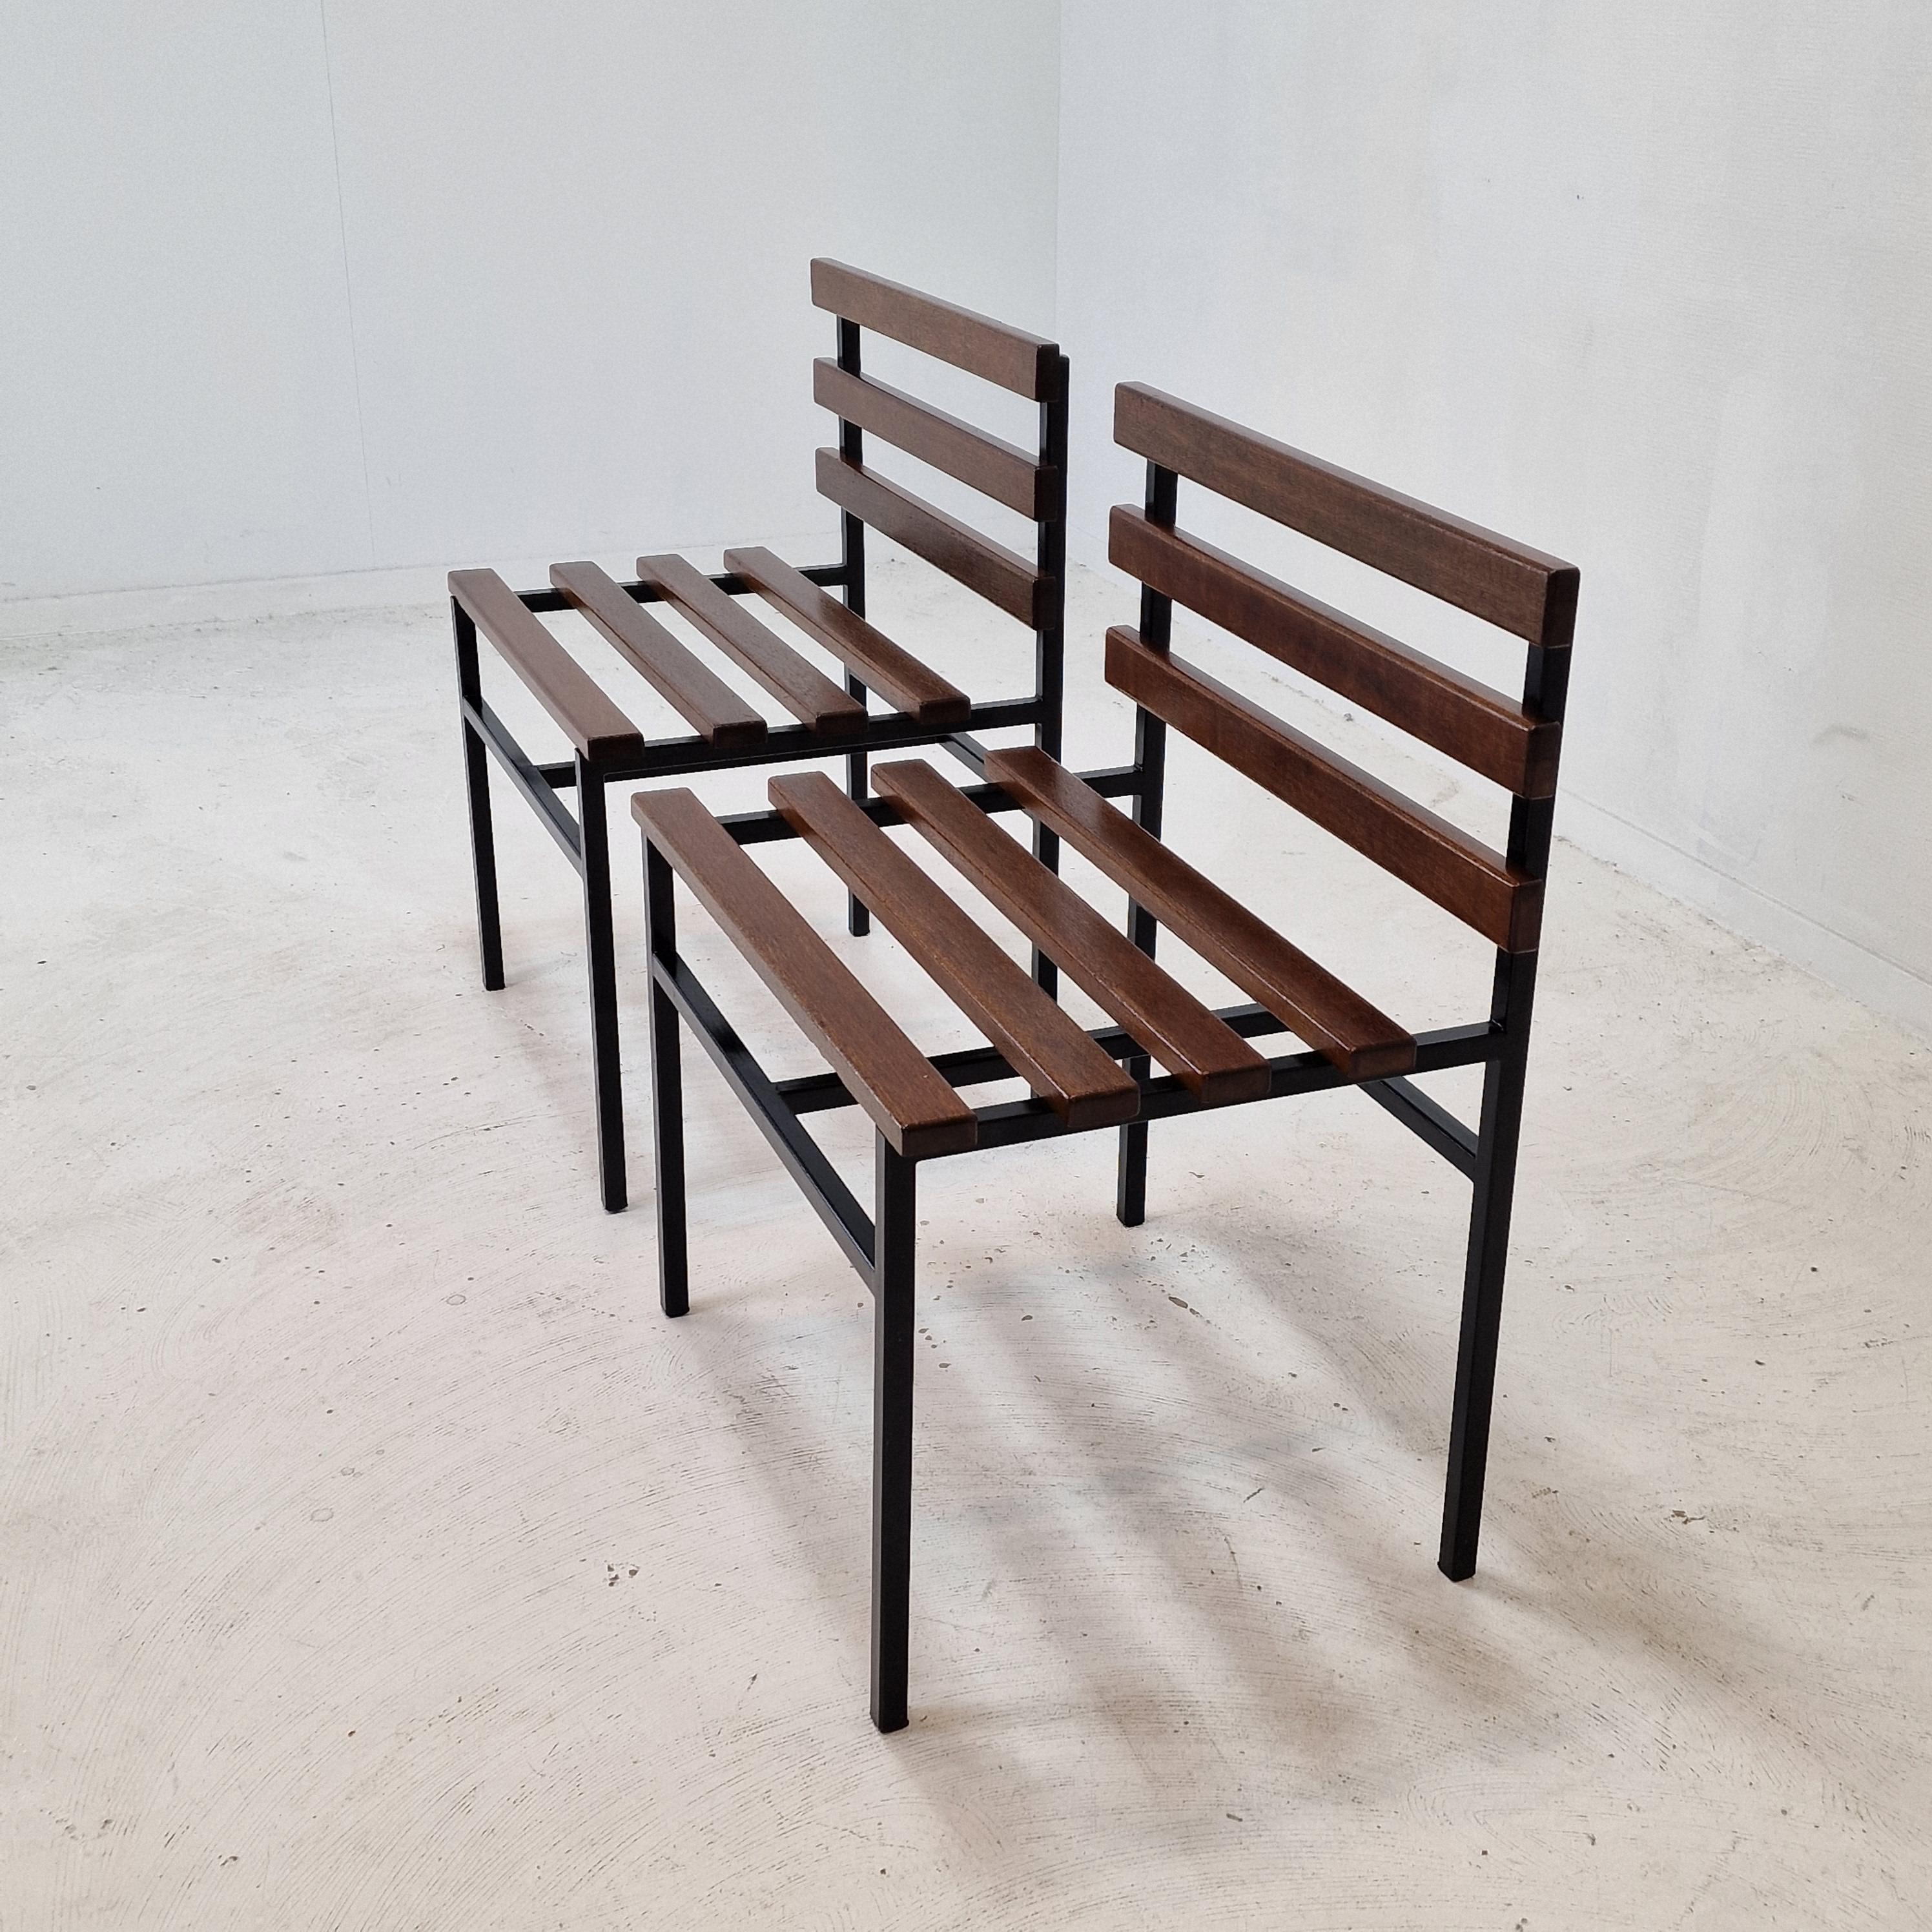 Wood Midcentury Set of 2 Chairs or Benches in Teak, Italy, 1960s For Sale